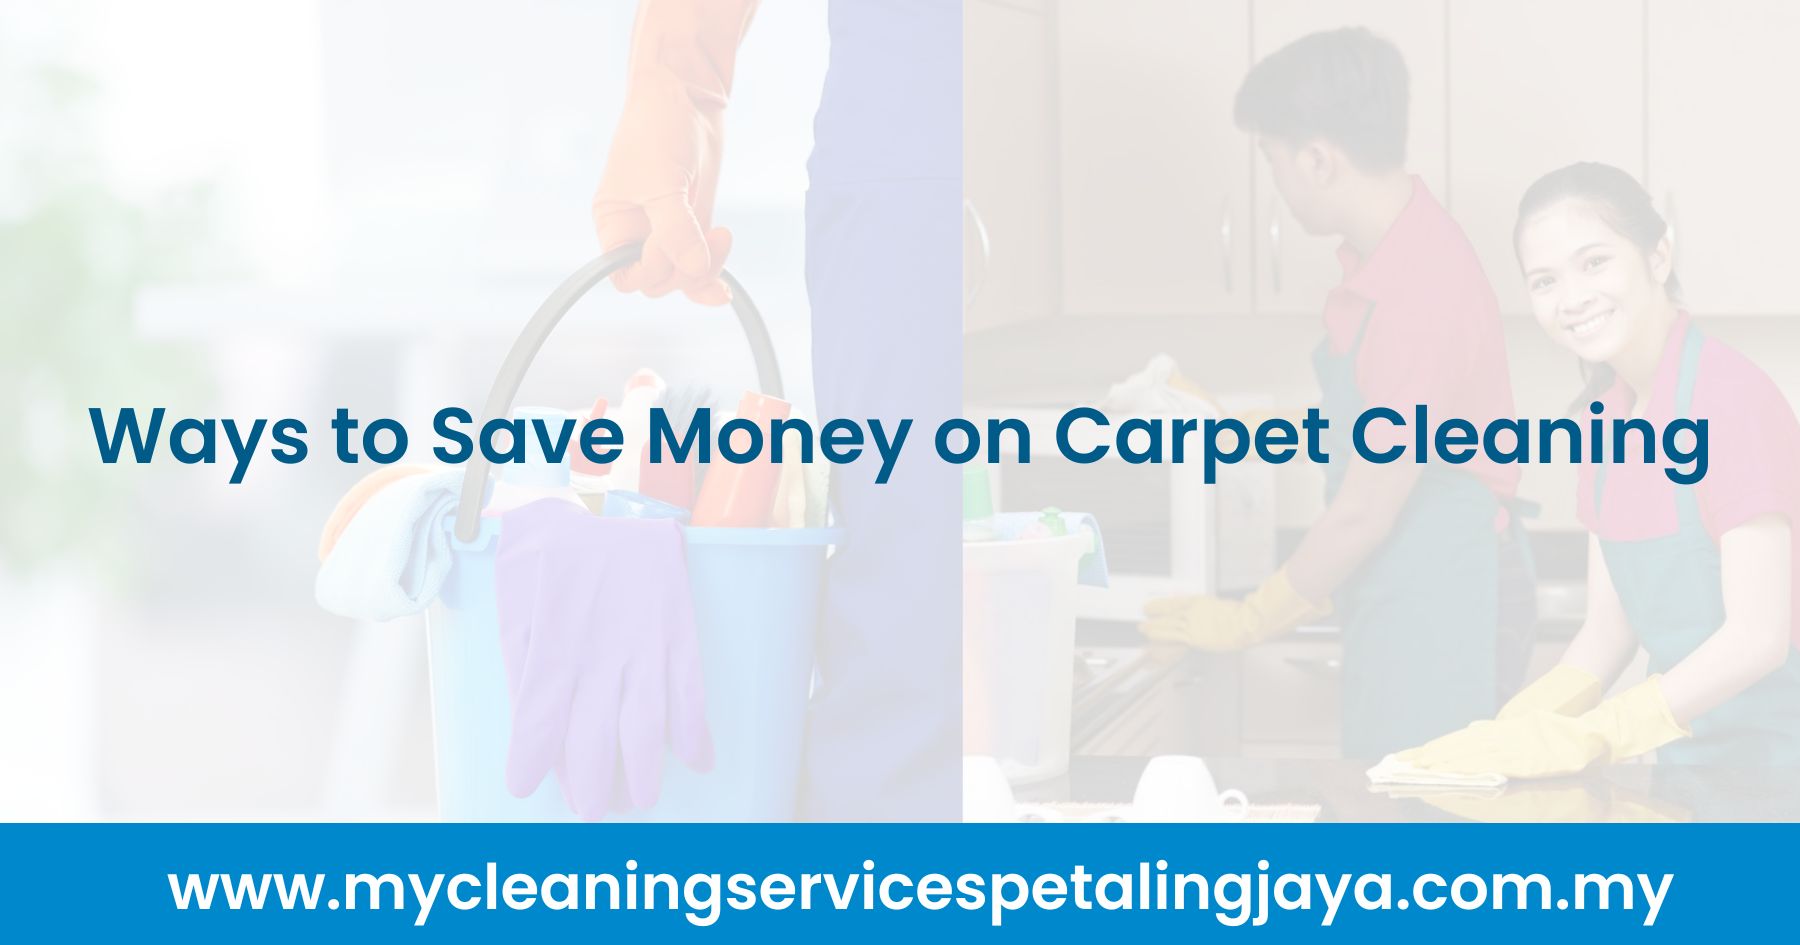 Ways to Save Money on Carpet Cleaning